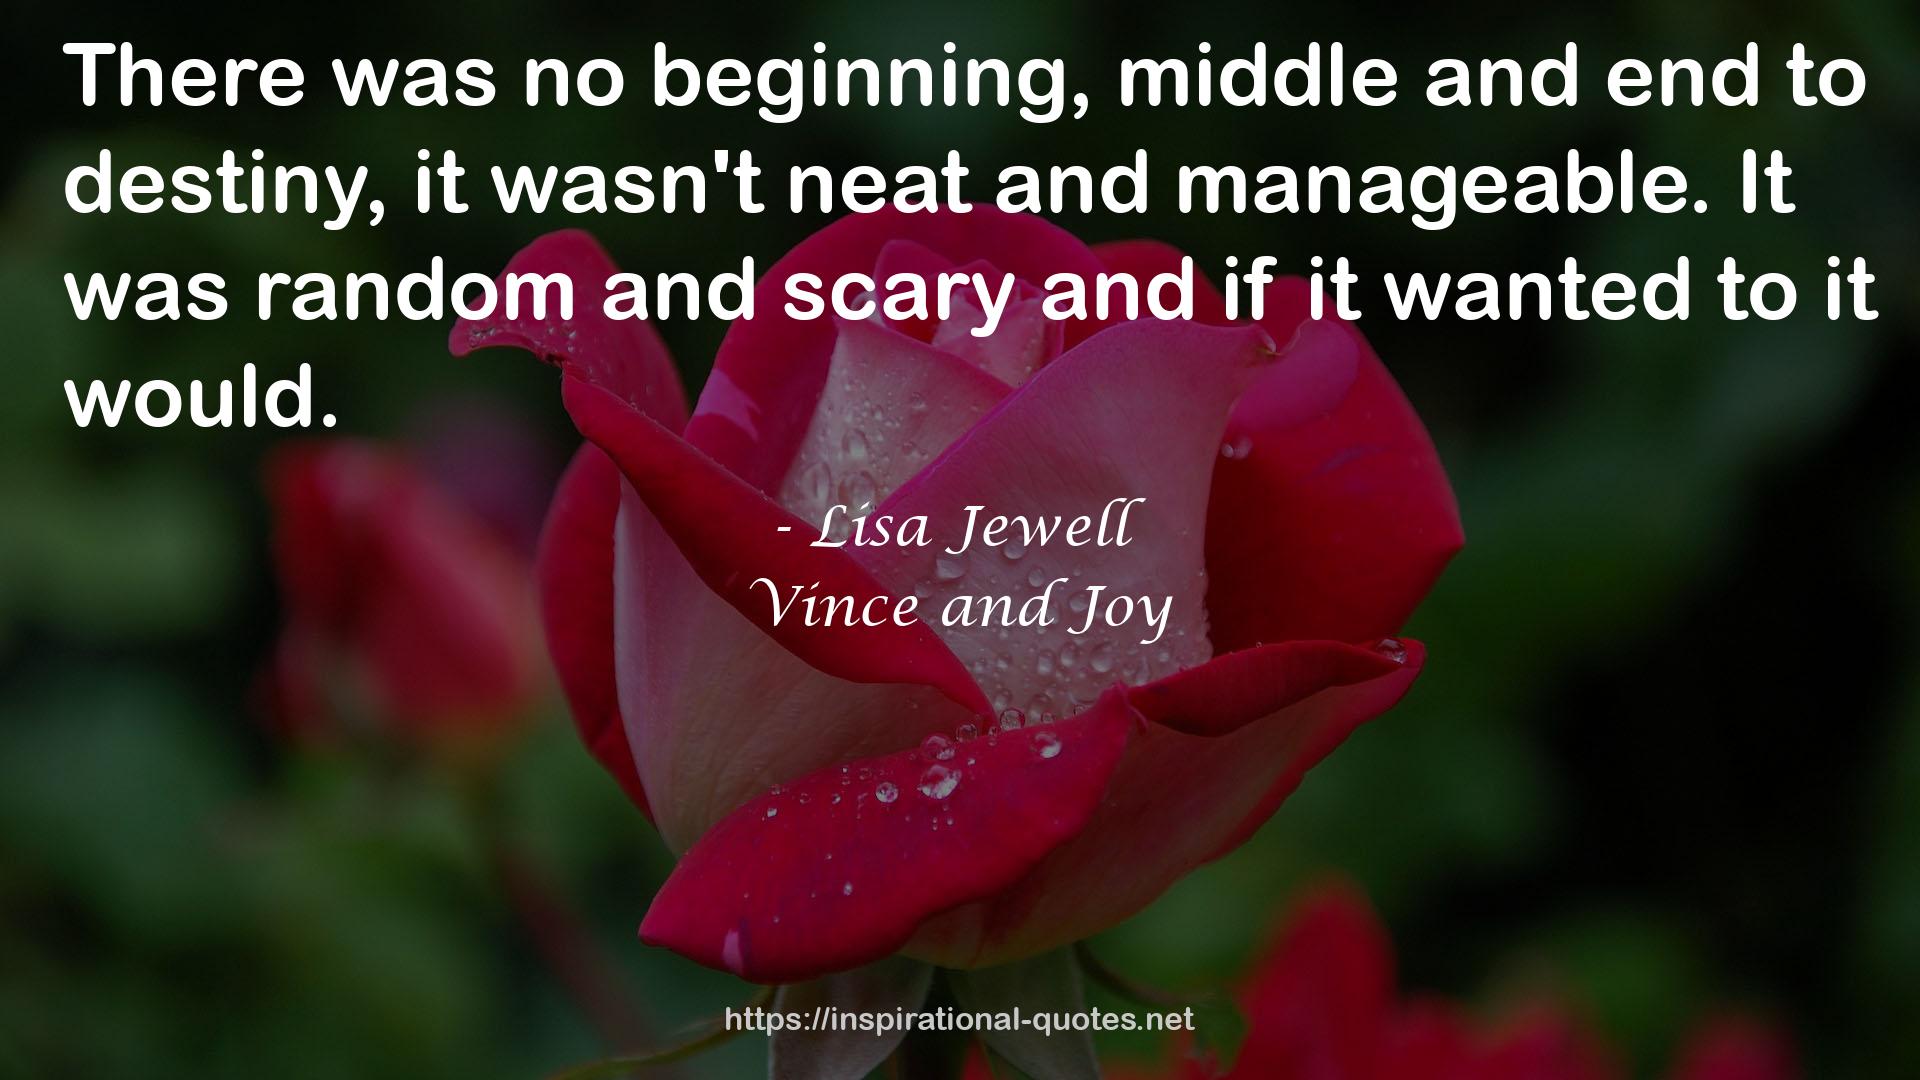 Lisa Jewell QUOTES